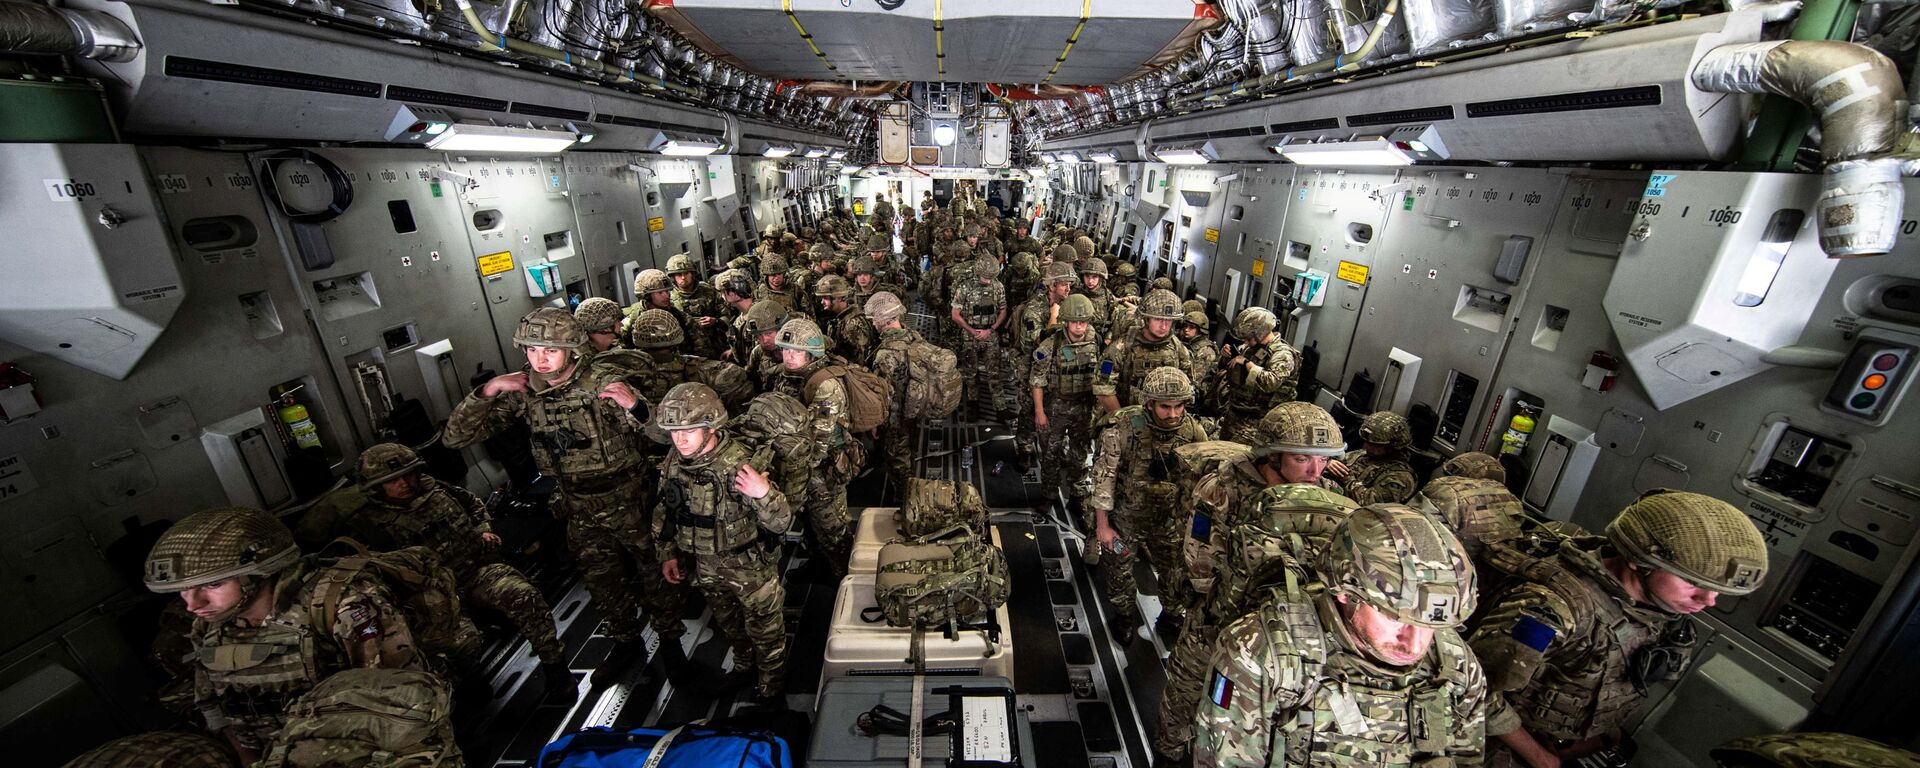 British Forces from 16 Air Assault Brigade arrive in Kabul, Afghanistan, to provide support to British nationals leaving the country, as part of Operation PITTING after Taliban insurgents took control of the presidential palace in Kabul, August 15, 2021. Leading Hand Ben Shread/RAF/UK Ministry of Defence 2021/Handout via REUTERS   THIS IMAGE HAS BEEN SUPPLIED BY A THIRD PARTY. - Sputnik International, 1920